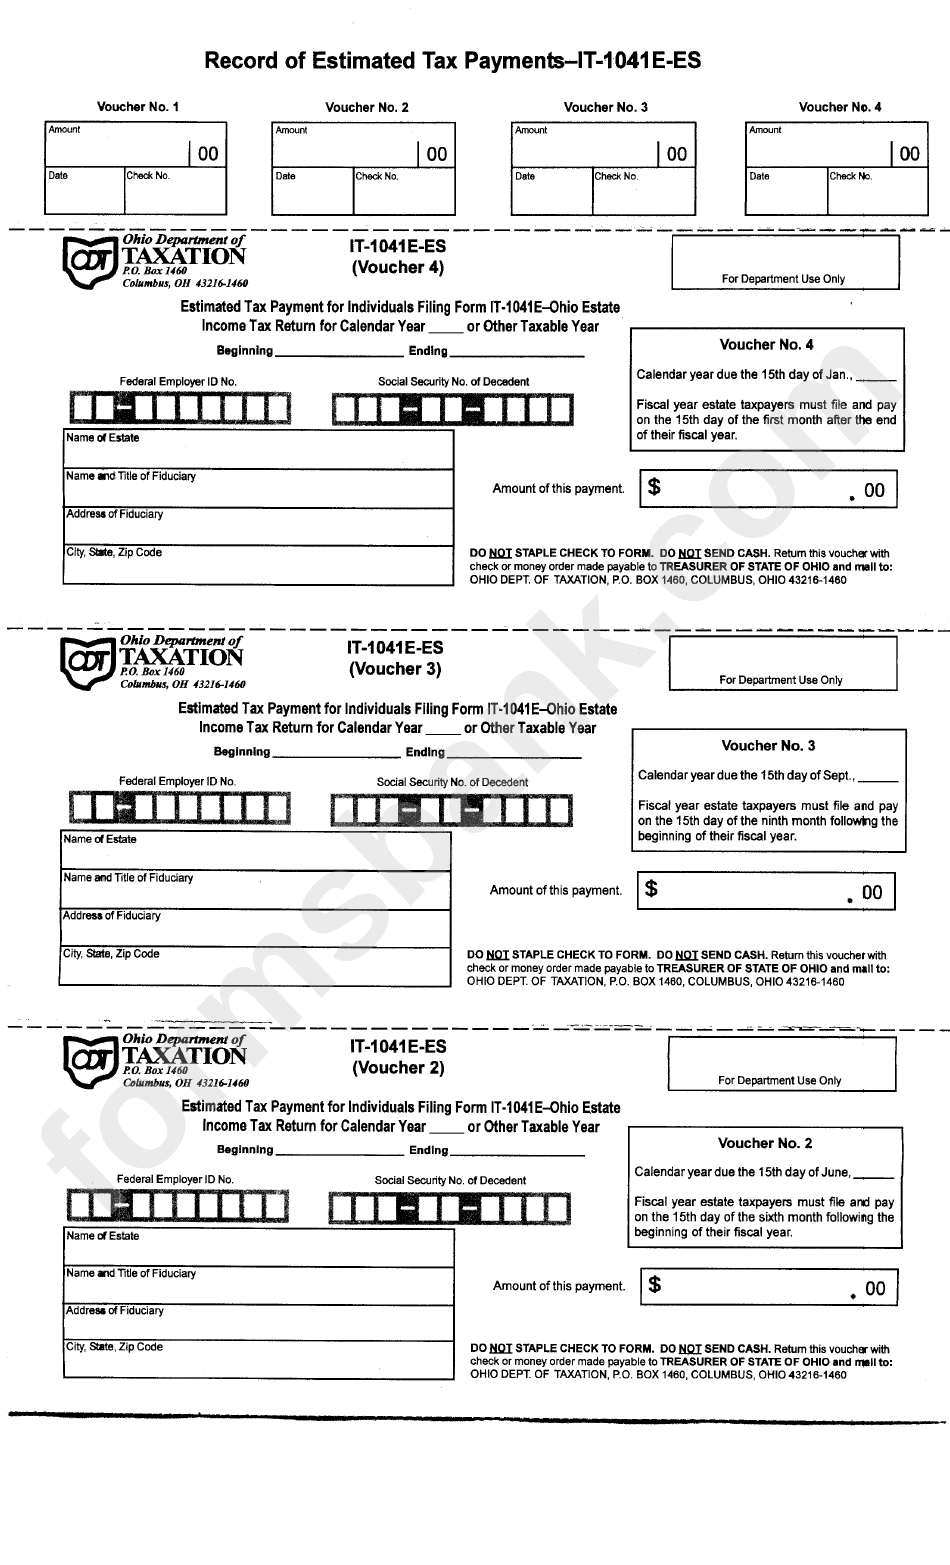 Form It-1041e-Es - Record Of Estimated Tax Payments Form